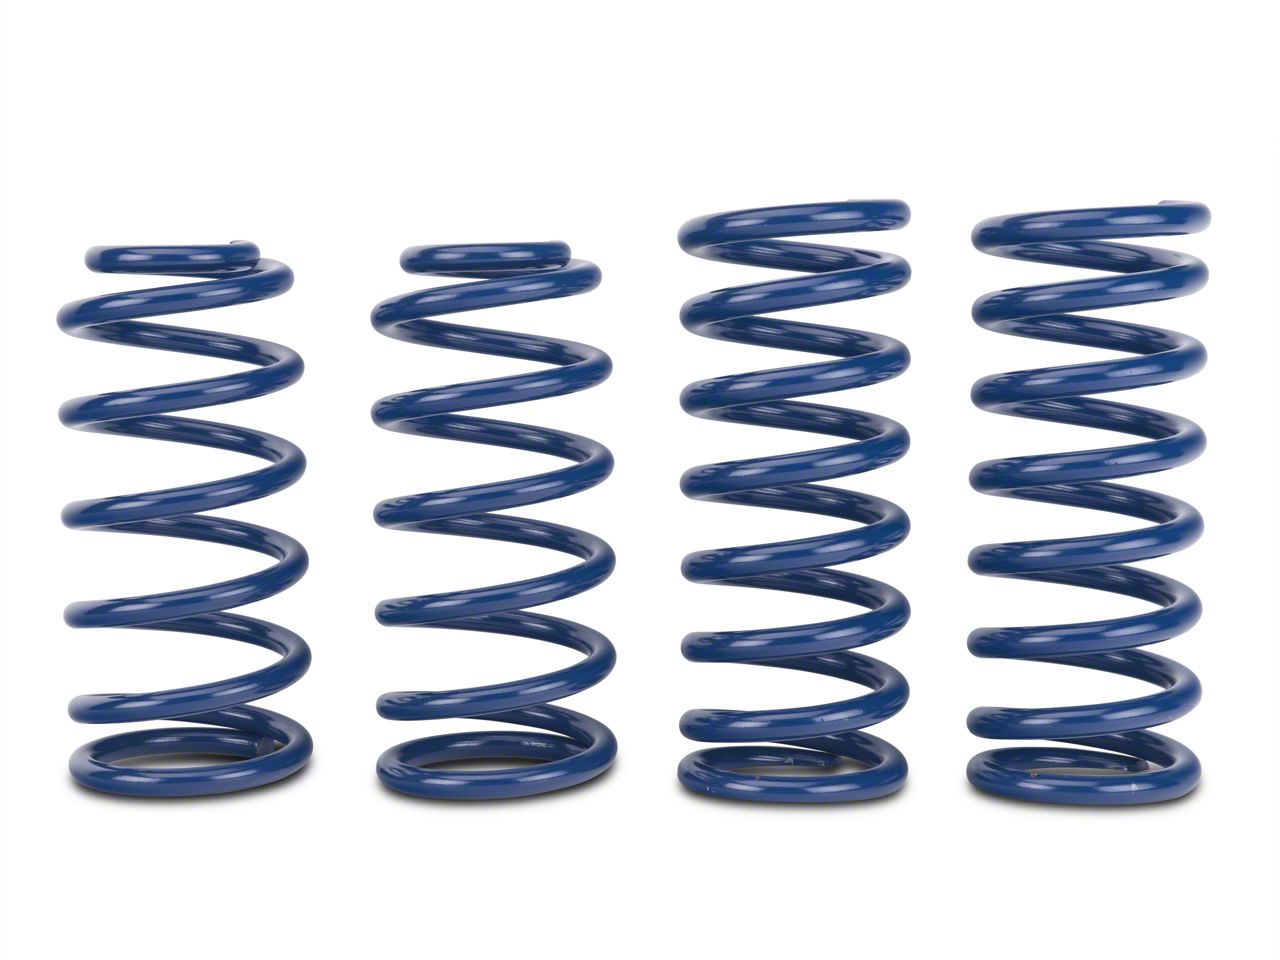 Details about   Godspeed Traction-S Lowering Springs For Ford Mustang Coupe 1999-04 